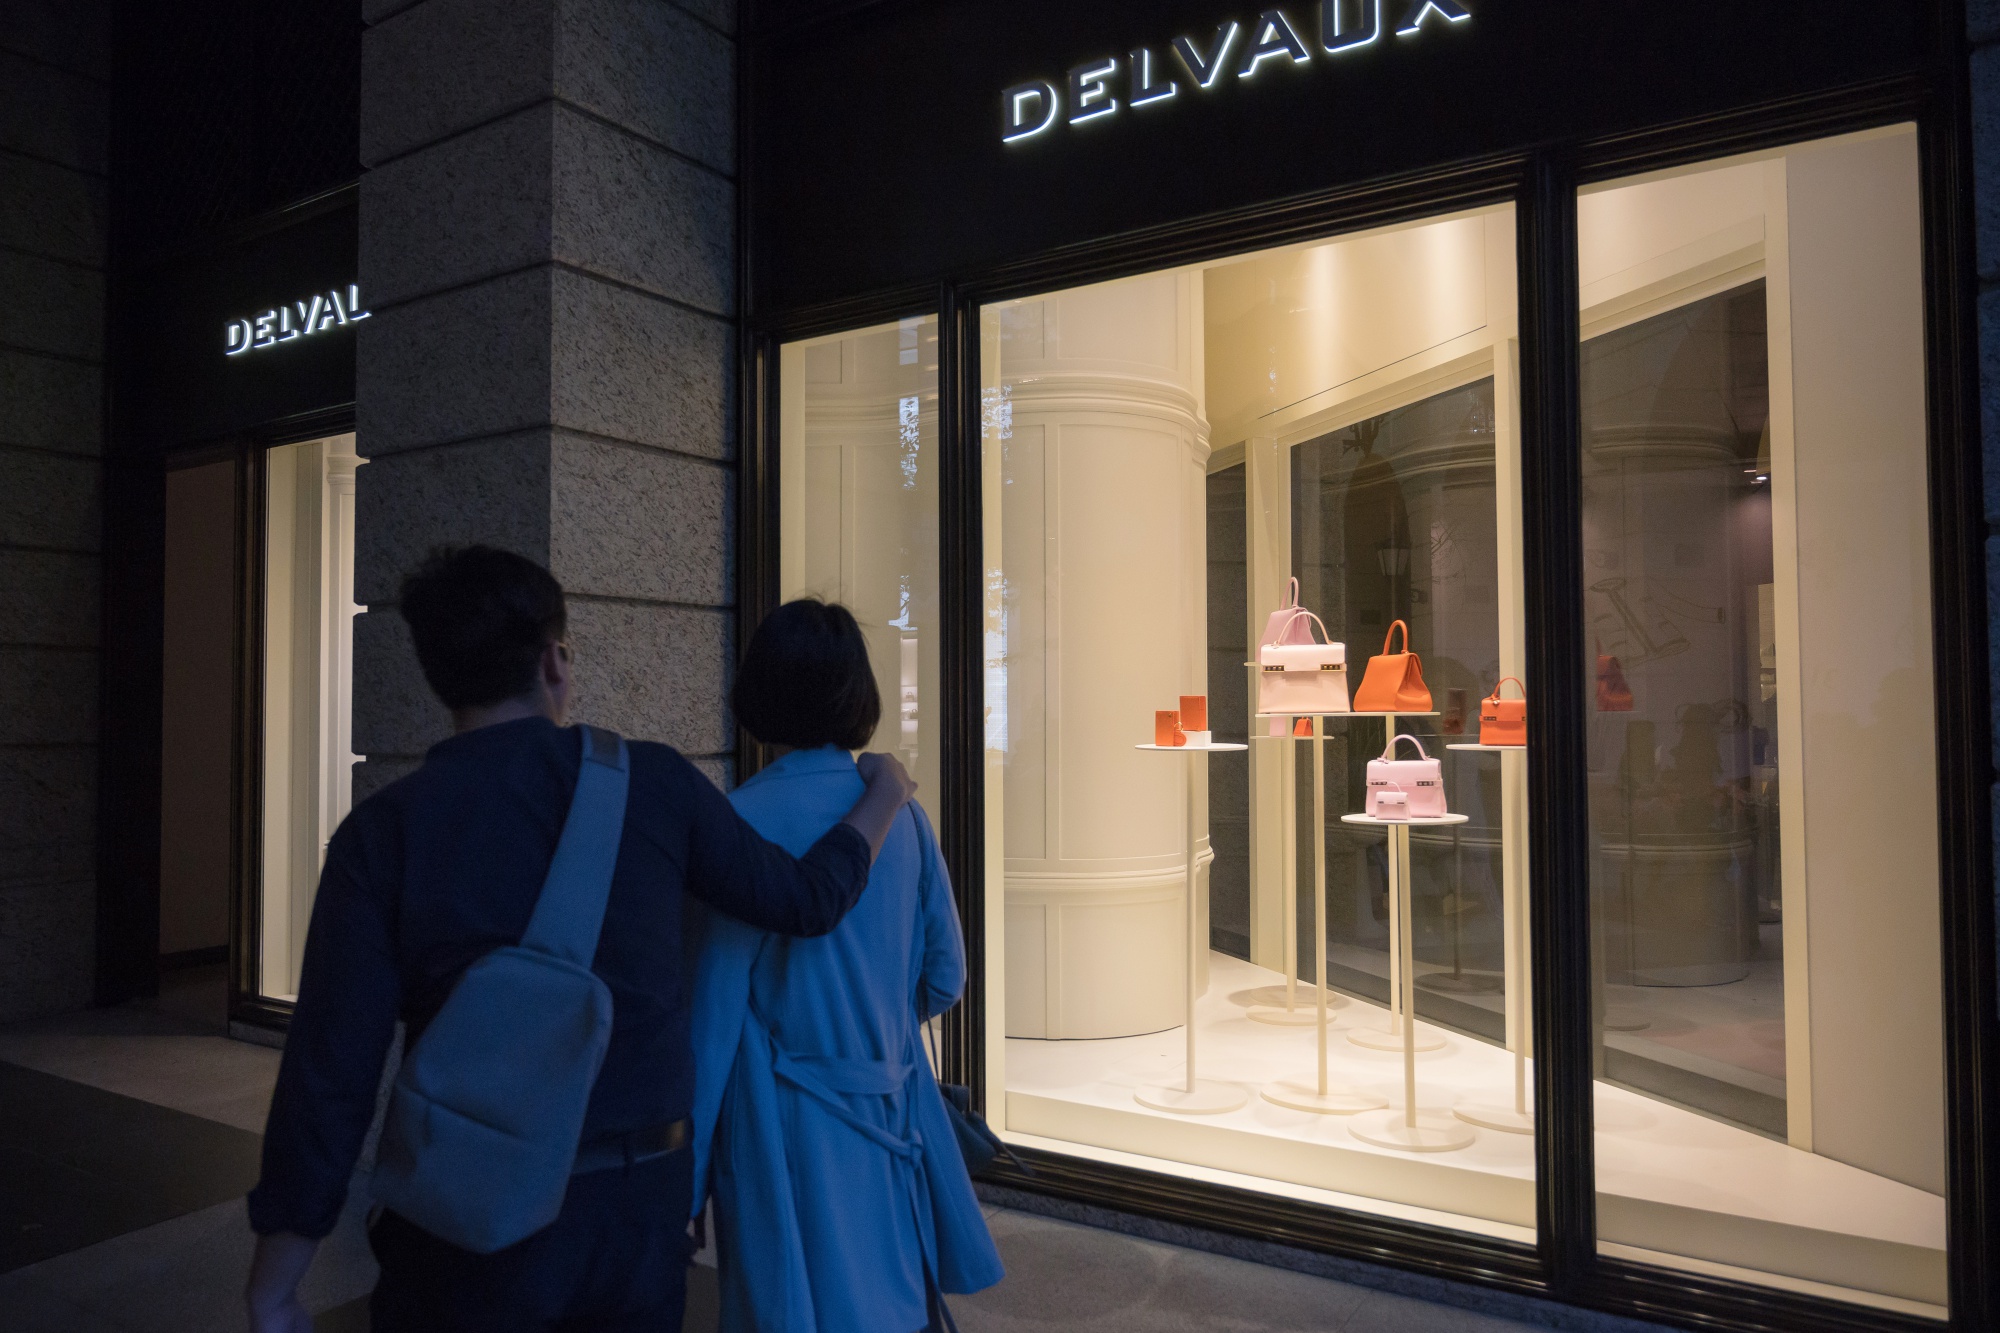 Delvaux Luxury Handbag Maker Acquired by Richemont - Bloomberg